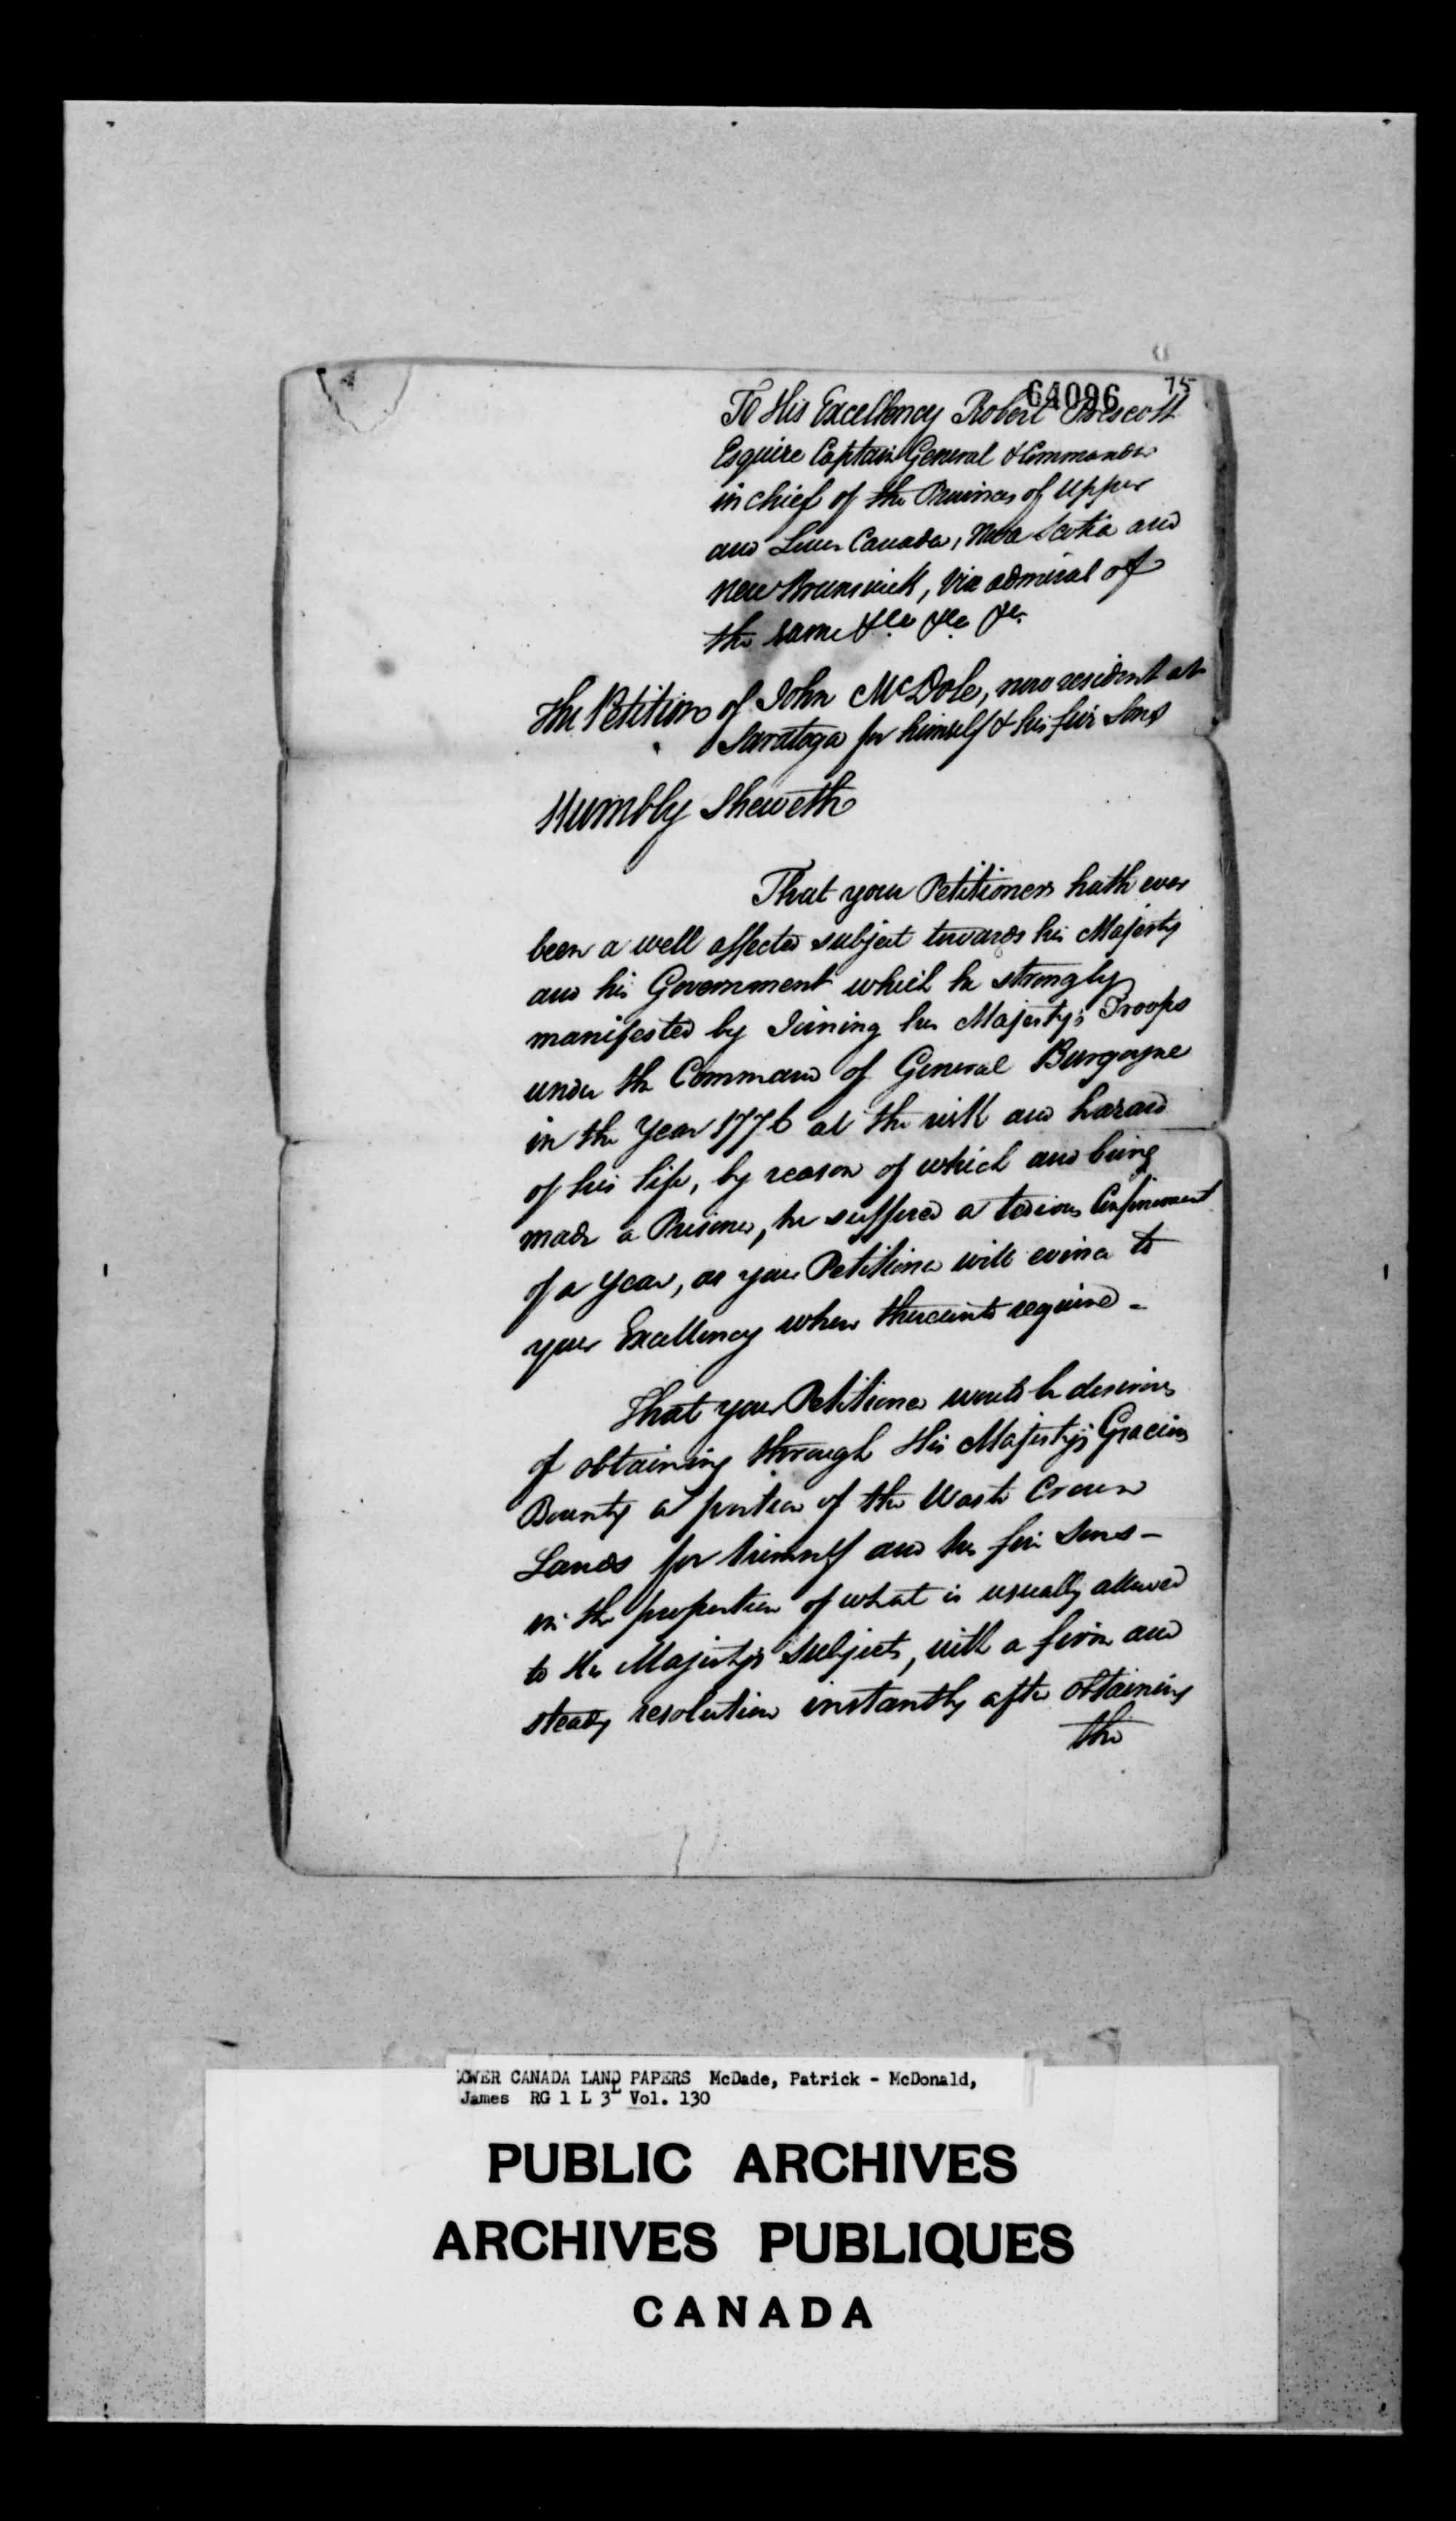 Digitized page of  for Image No.: e008709159